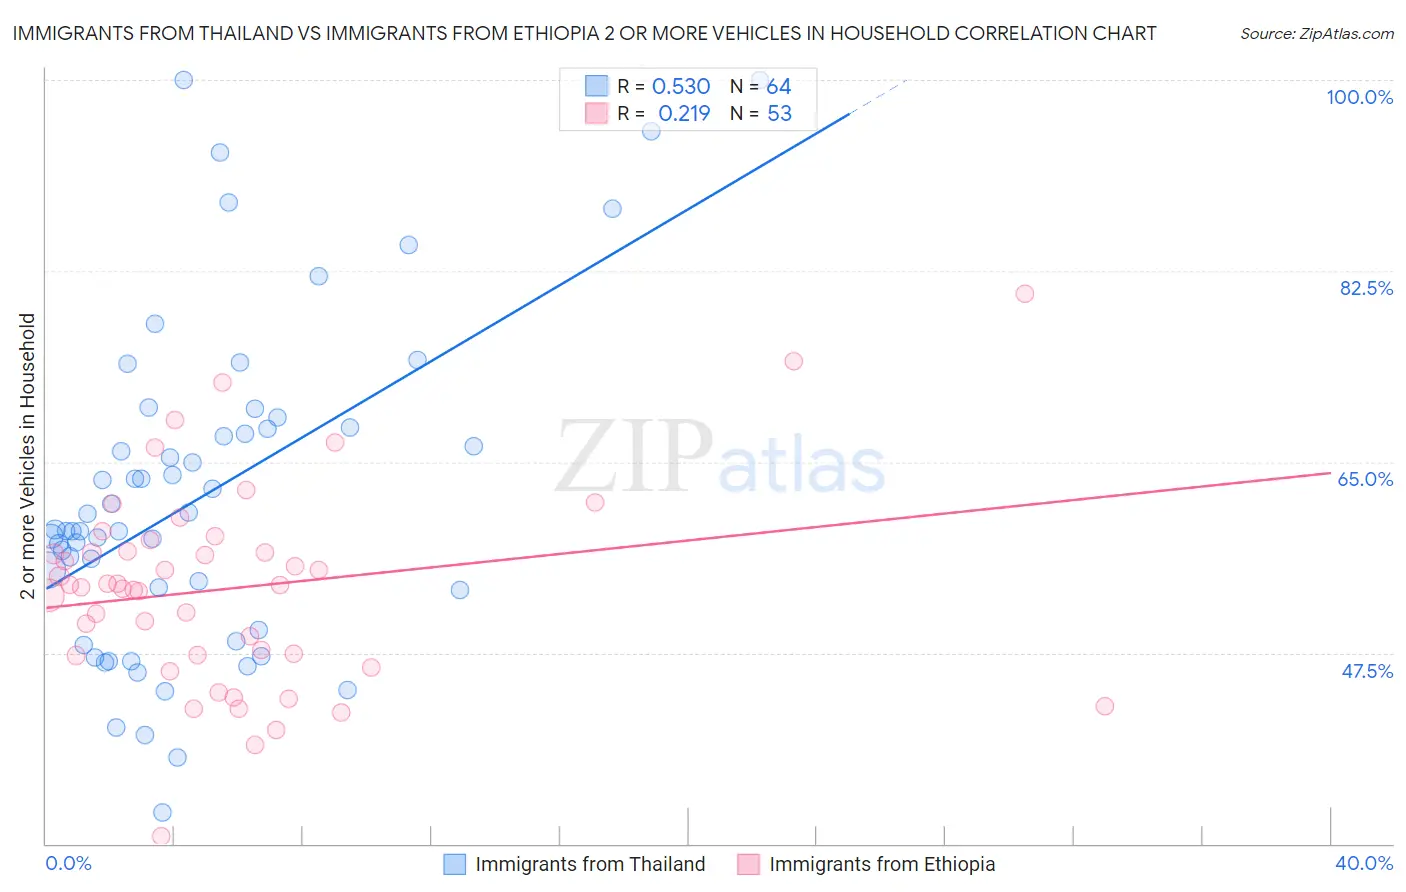 Immigrants from Thailand vs Immigrants from Ethiopia 2 or more Vehicles in Household